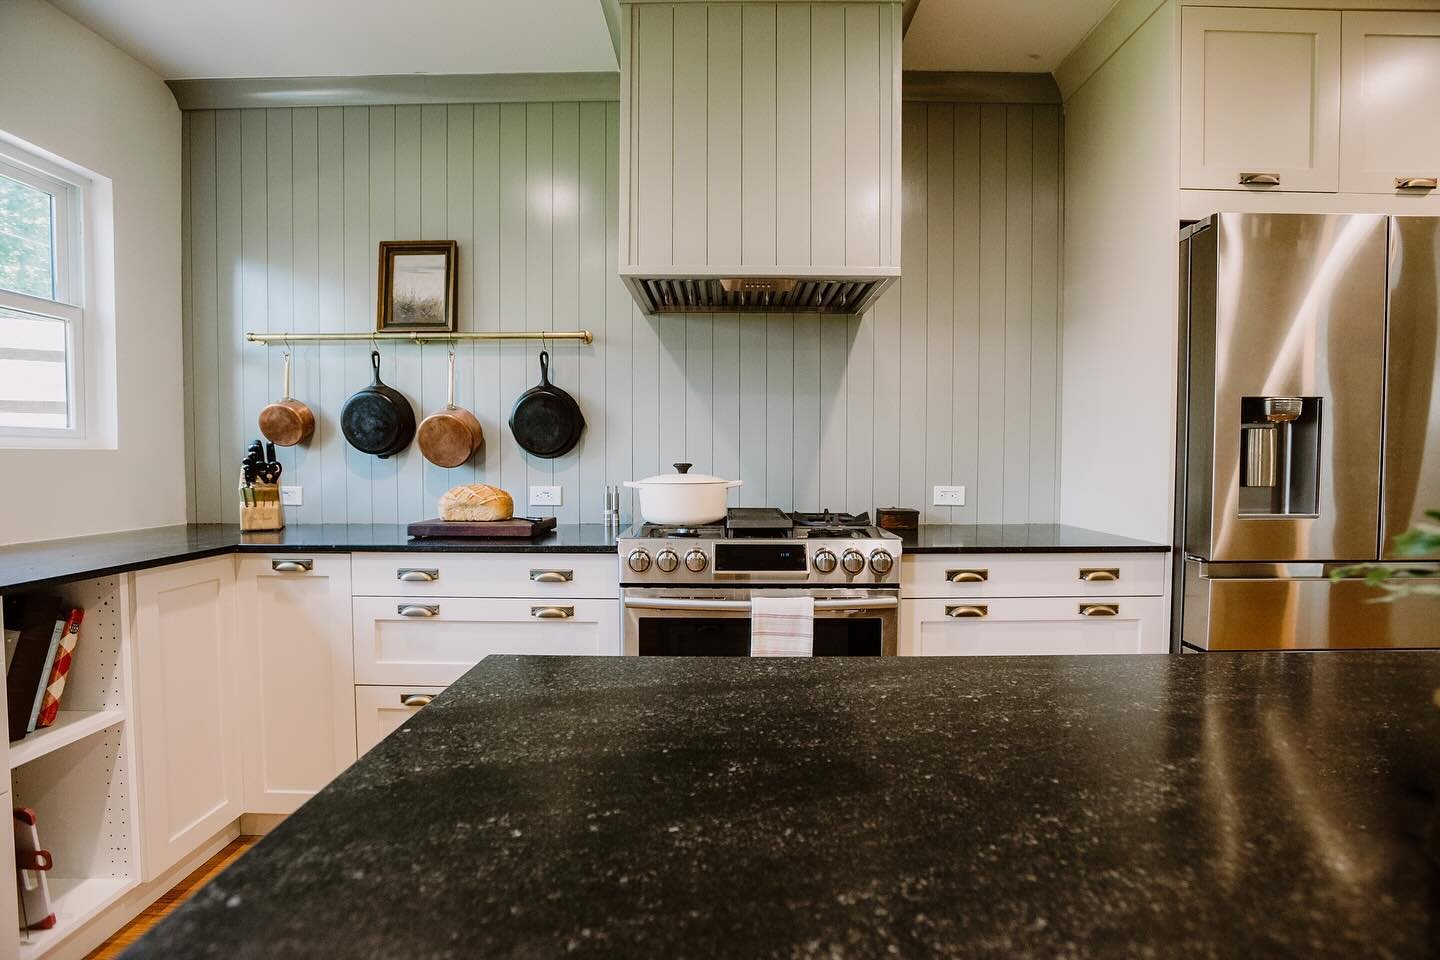 Swipe left ⬅️ to witness the magic of progress!  Can you believe we completed this kitchen makeover back in 2020?  It&rsquo;s incredible to pause and reflect on just how far we&rsquo;ve come.  This transformation never fails to amaze me. 

While my s